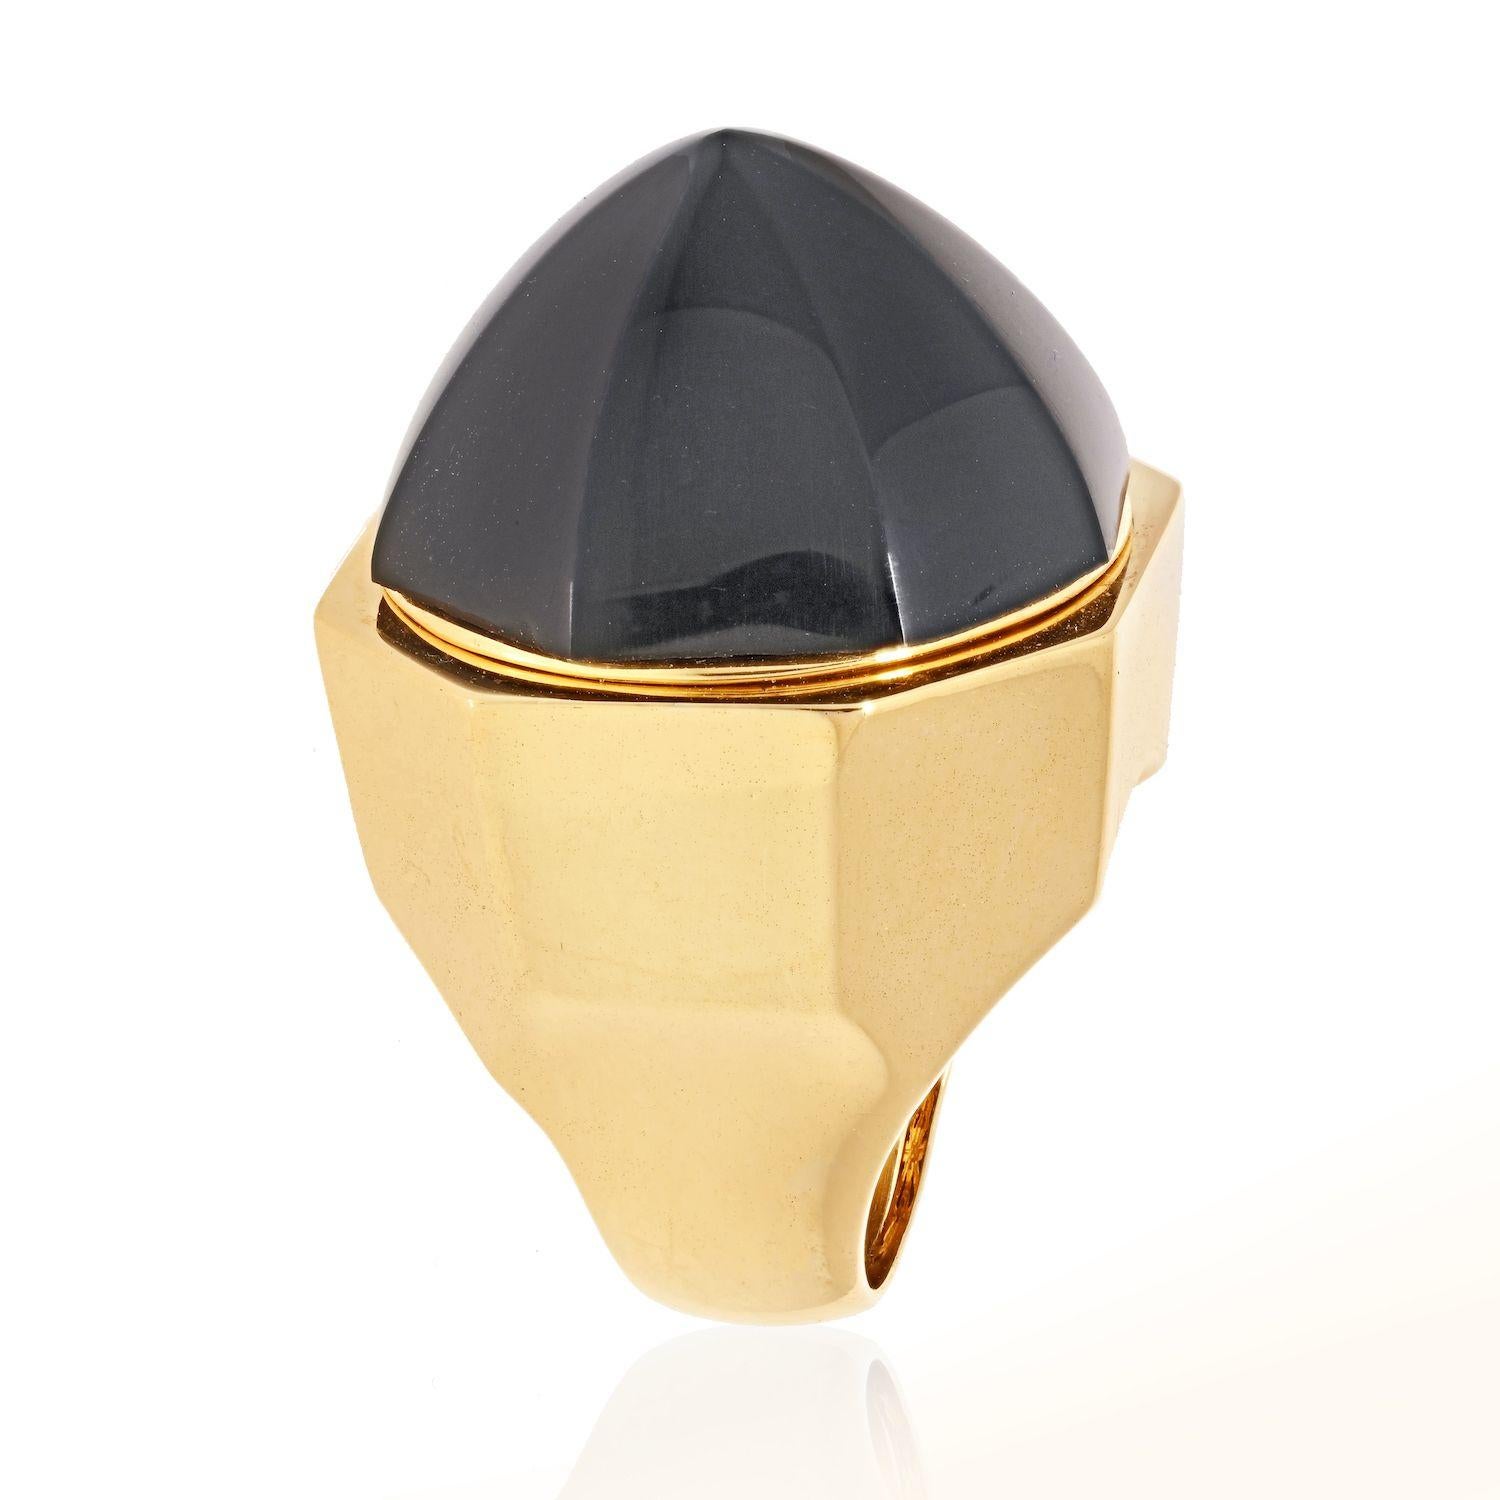 Oversized black onyx dome ring by David Webb. Crafted in 18K yellow gold. 
Ring diameter: 26mm
Sits high off the finger: 24mm
Size 6 